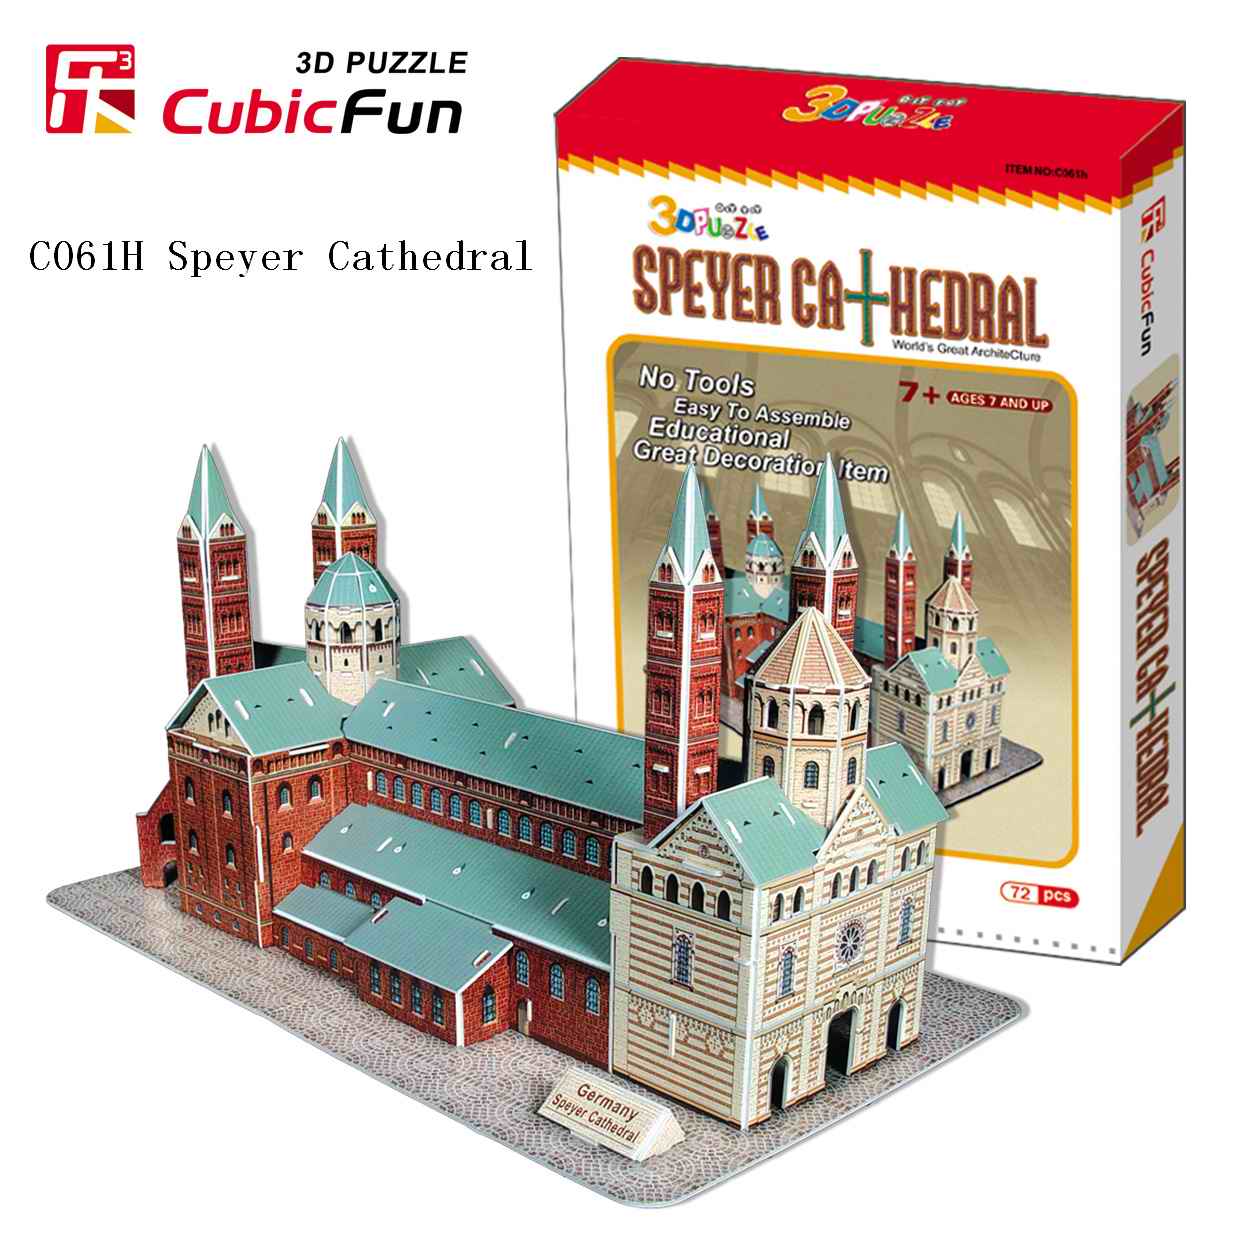 3D PUZZLE toys & promotional gifts